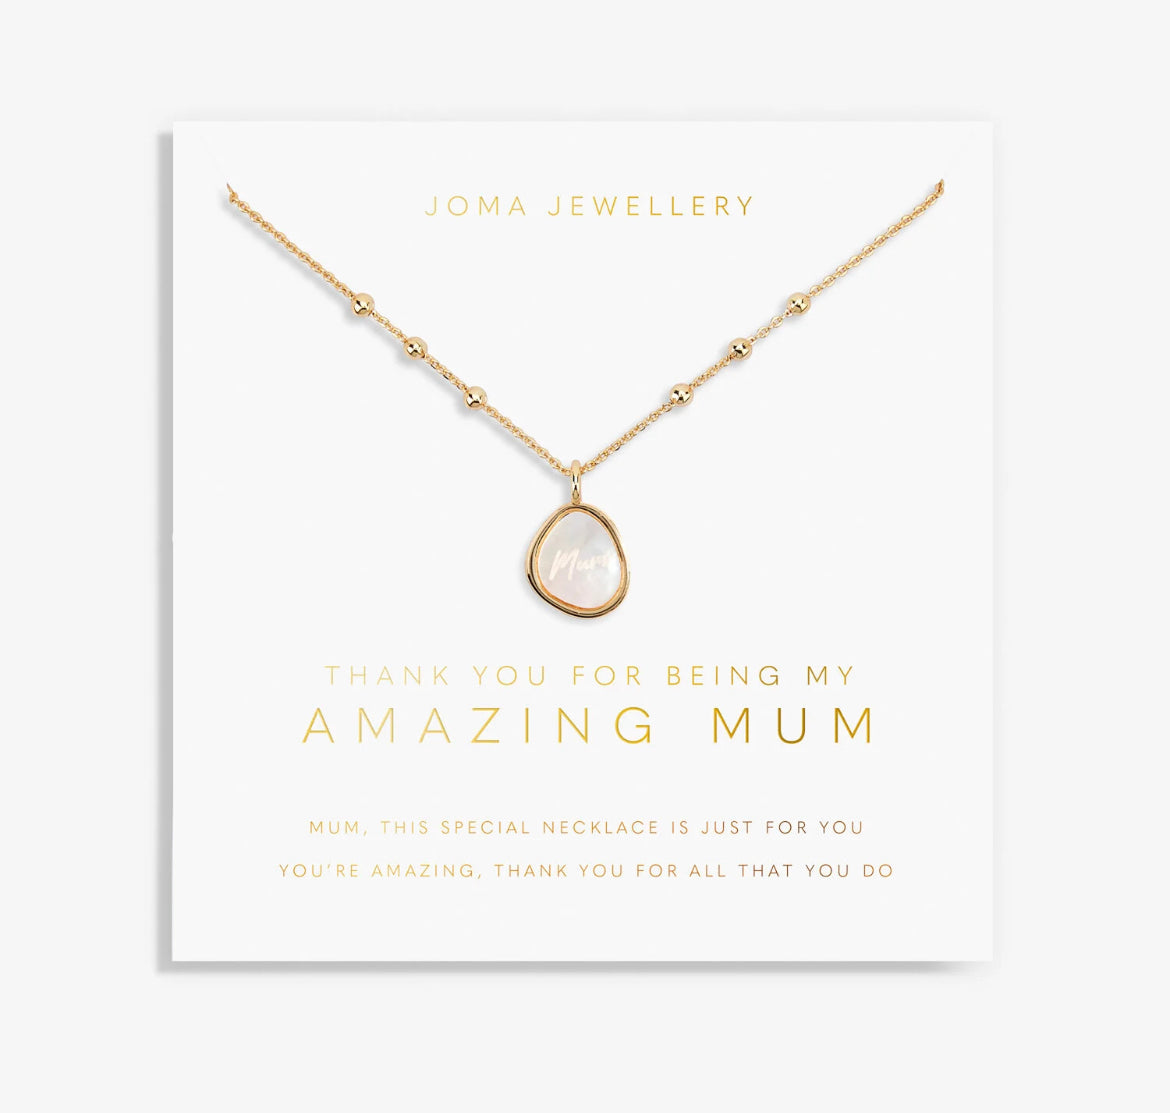 My Moments 'Thank You For Being My Amazing Mum' Necklace